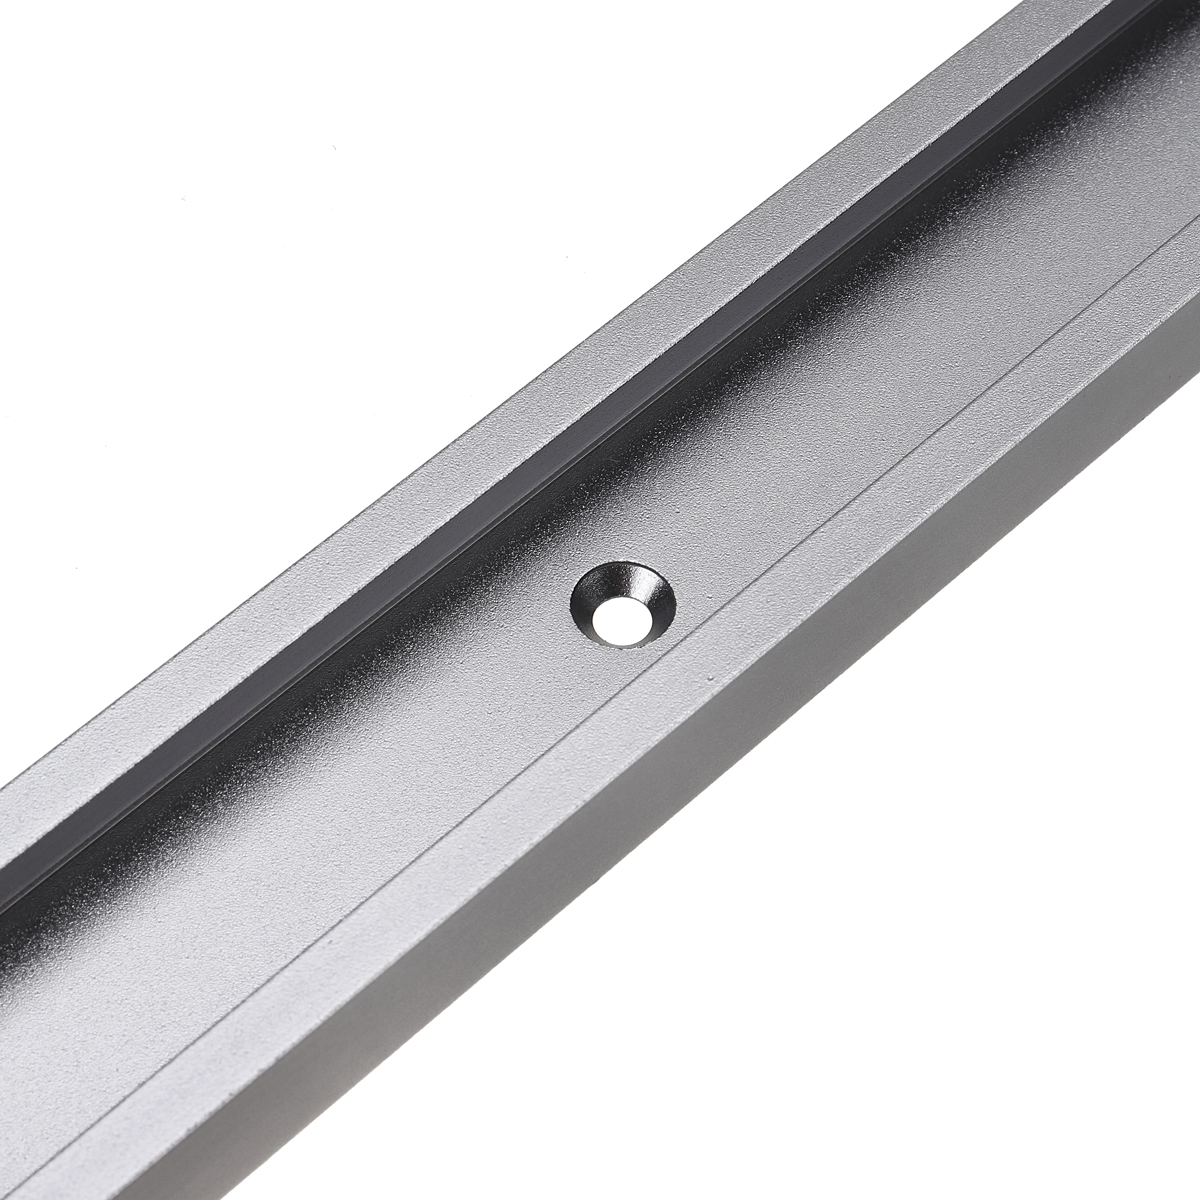 300mm-to-1220mm-Grey-T-Track-with-Predrilled-Mounting-Holes-30mm-x-128mm-Miter-Slot-for-Saw-Router-T-1810952-9